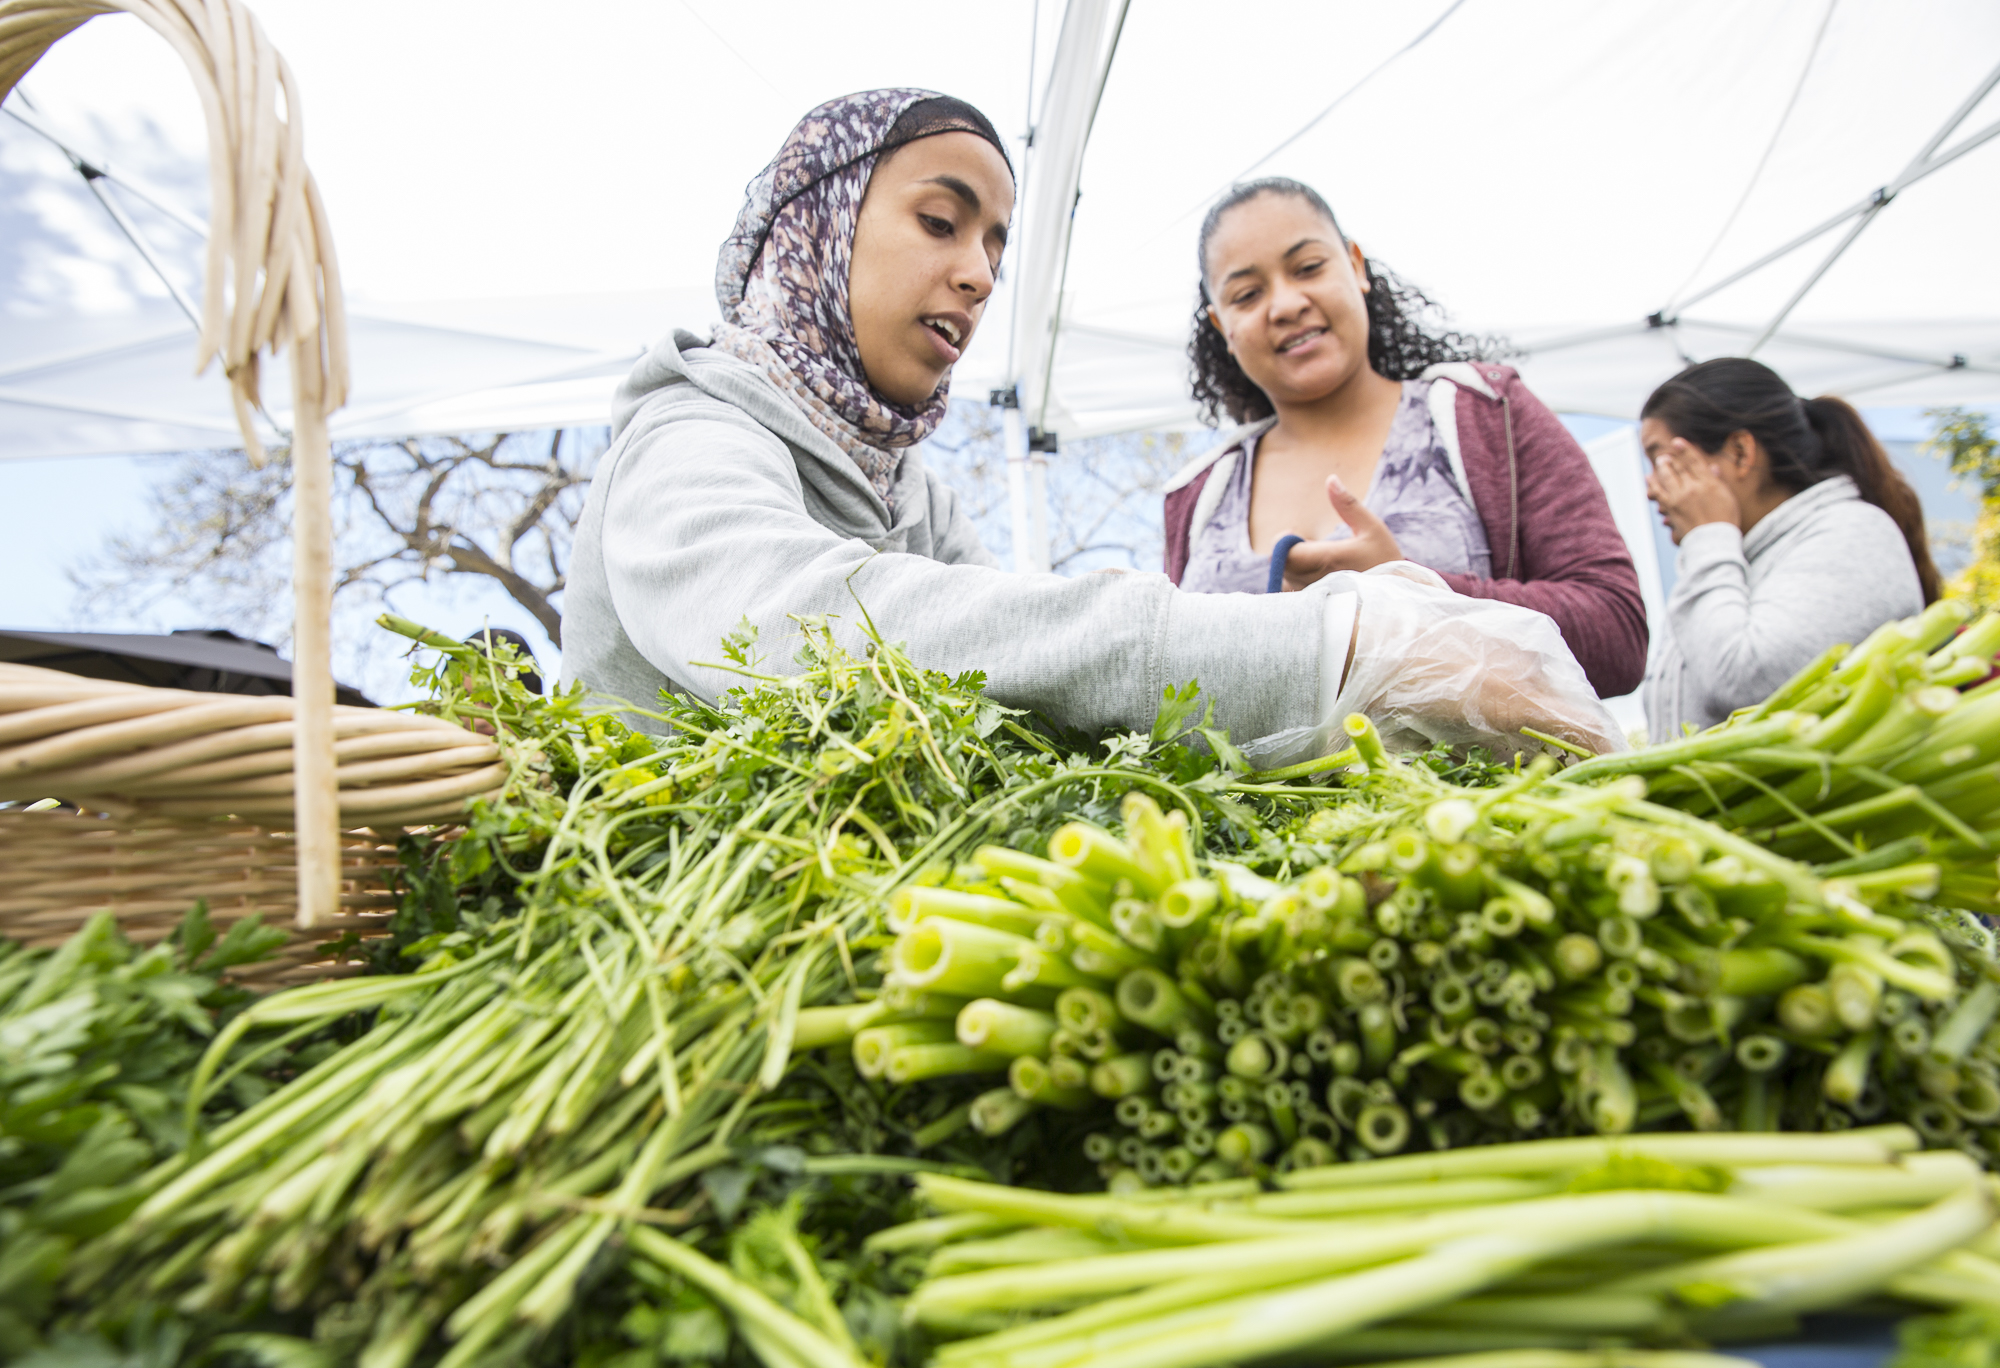  Santa Monica College (SMC) student and biology major Amira Majrashi (left) volunteers to helps give fresh produce from the Corsair Farmers Market to Santa Monica College student Jade Siracha (right) during the SMC Earth Day event “Students Feeding S